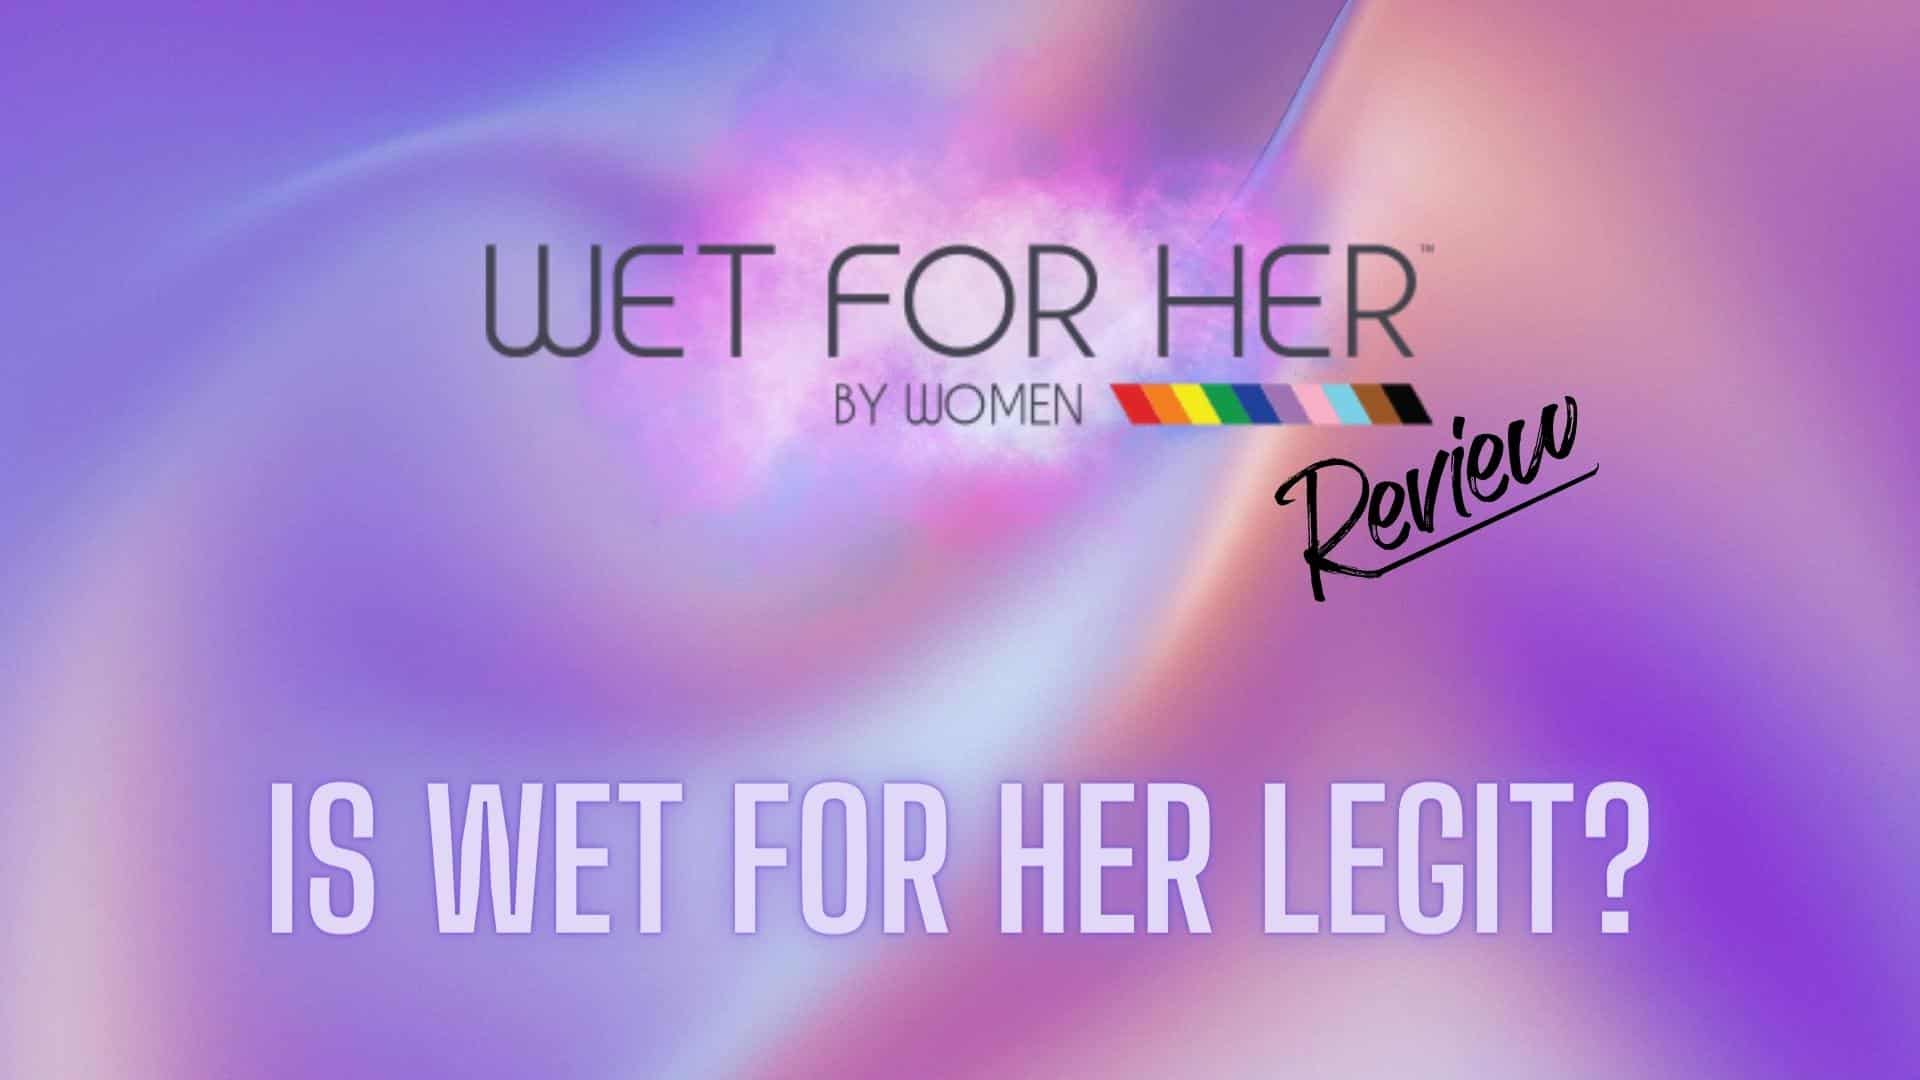 Wet For Her Review: Is Wet For Her Legit?